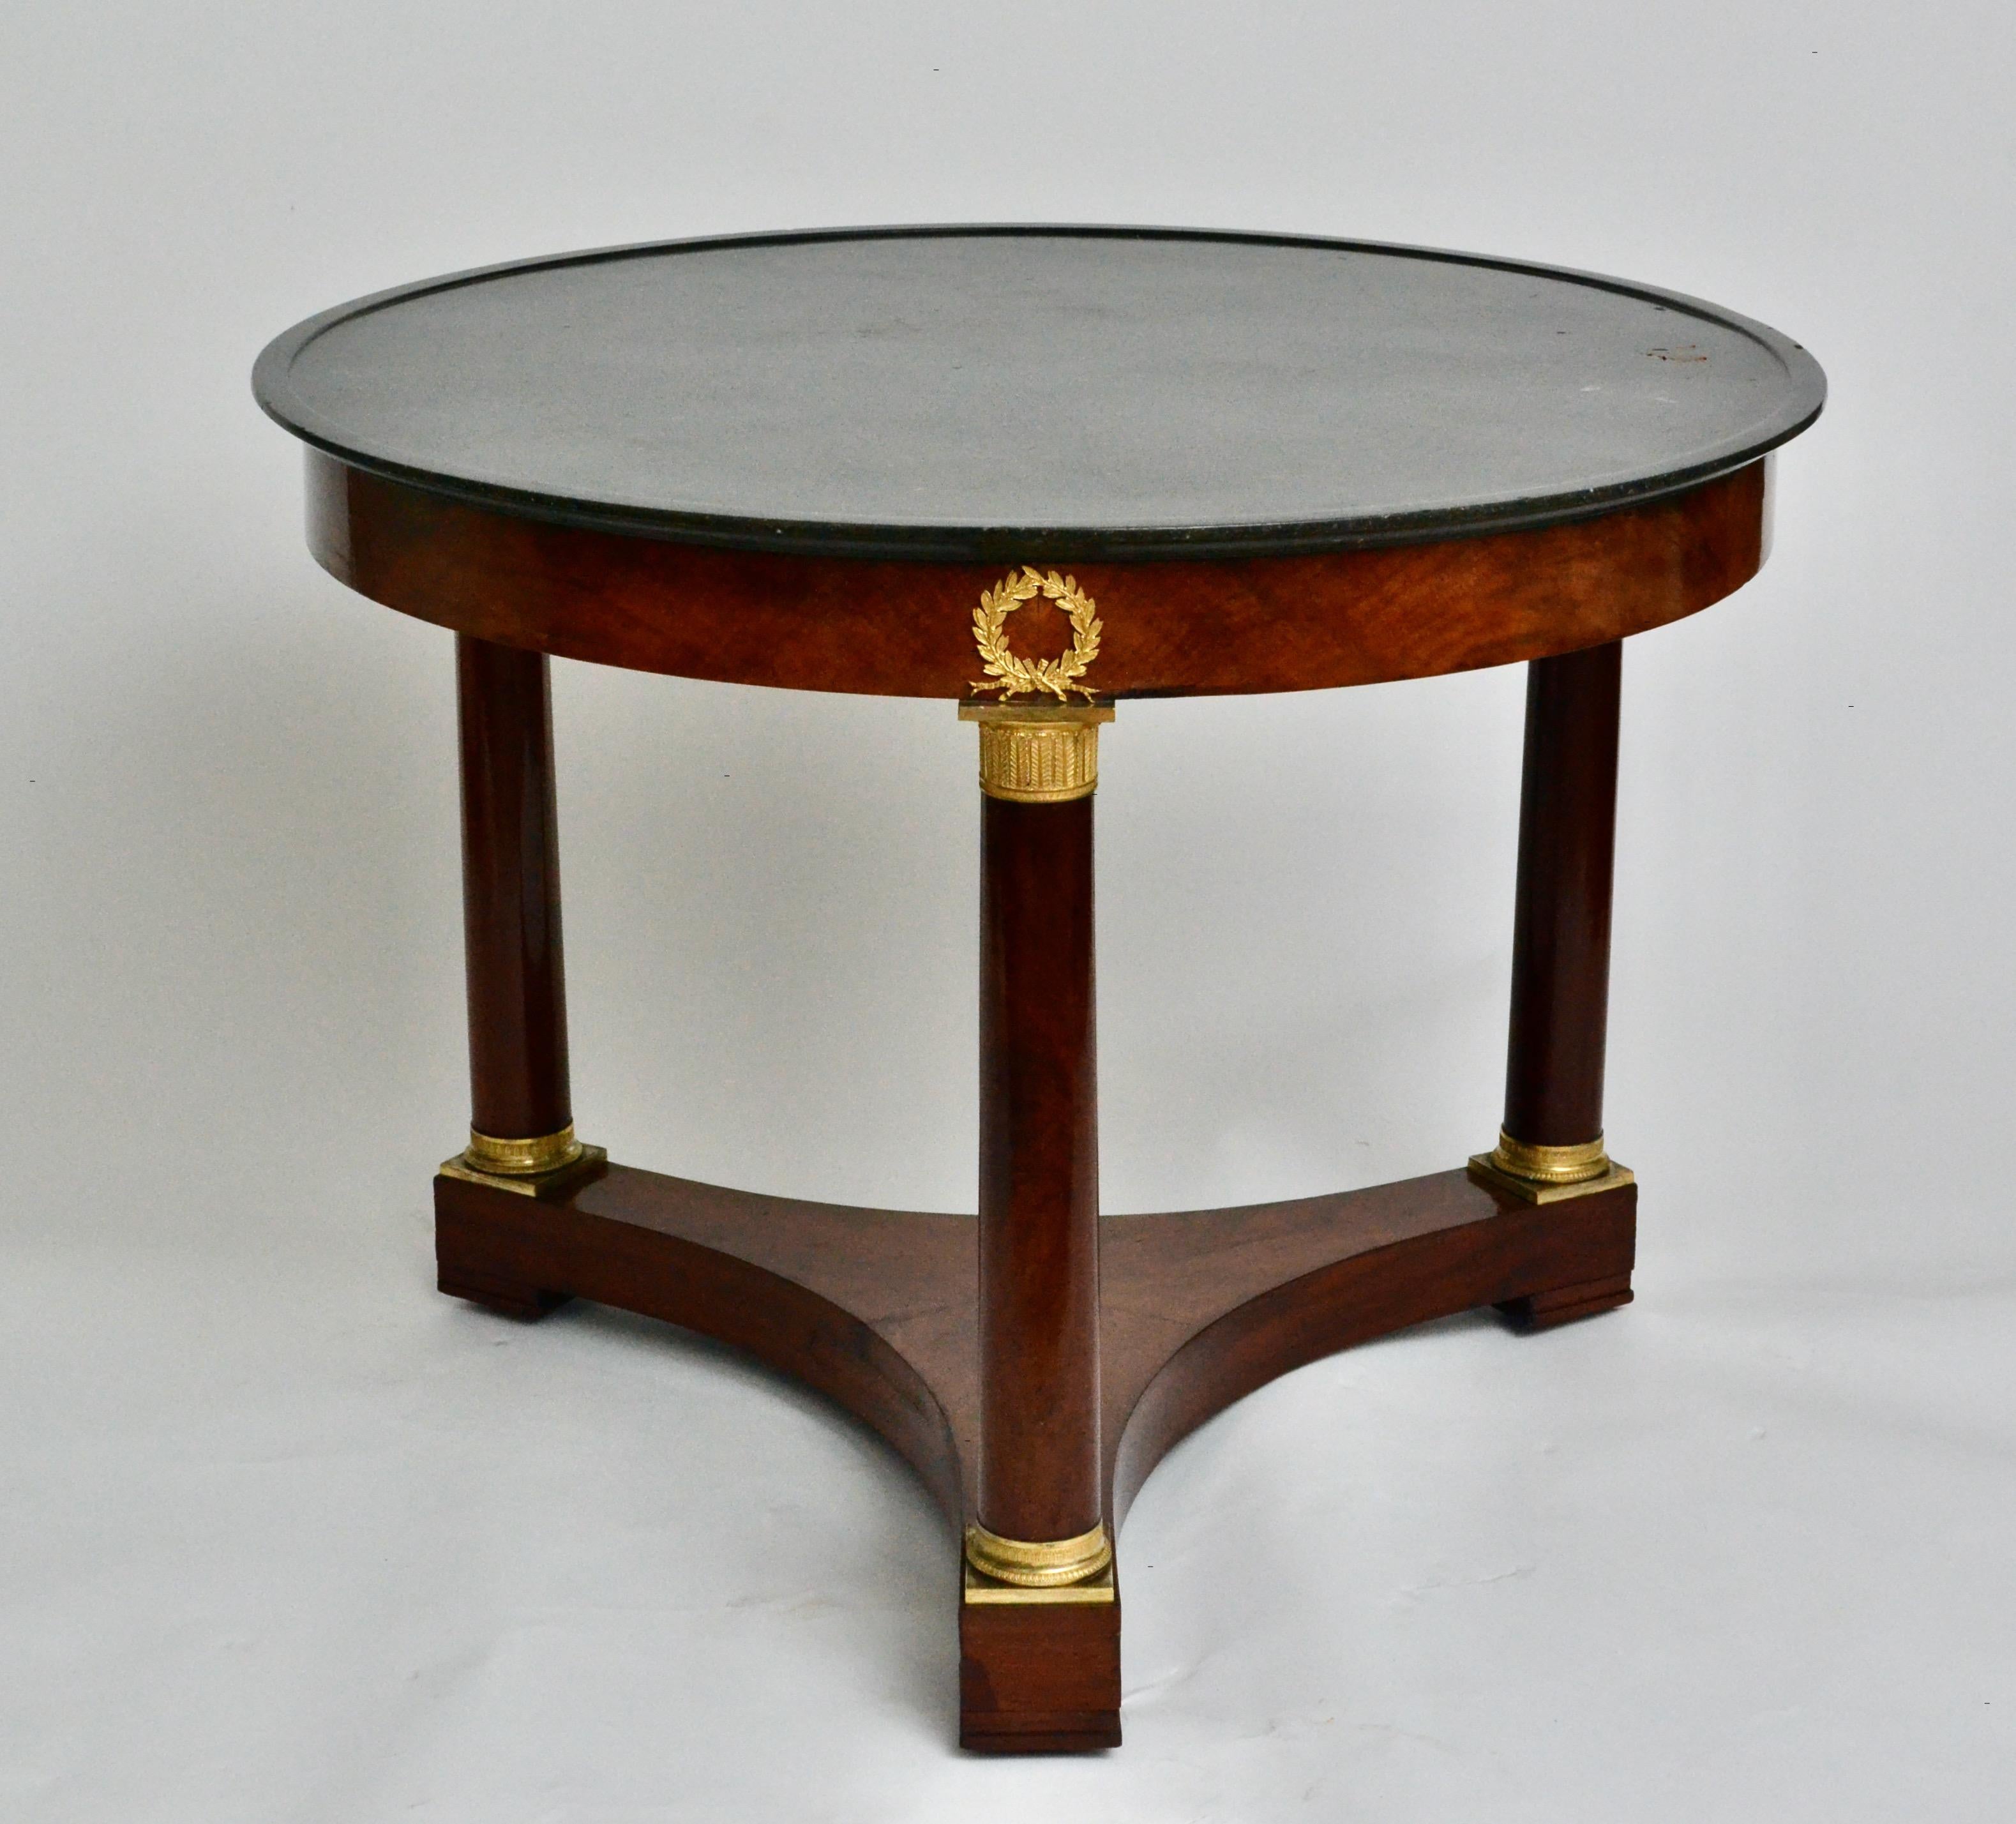 French Empire Gueridon or Center Table With Black Marble Top With Gilt Bronze Mounts.